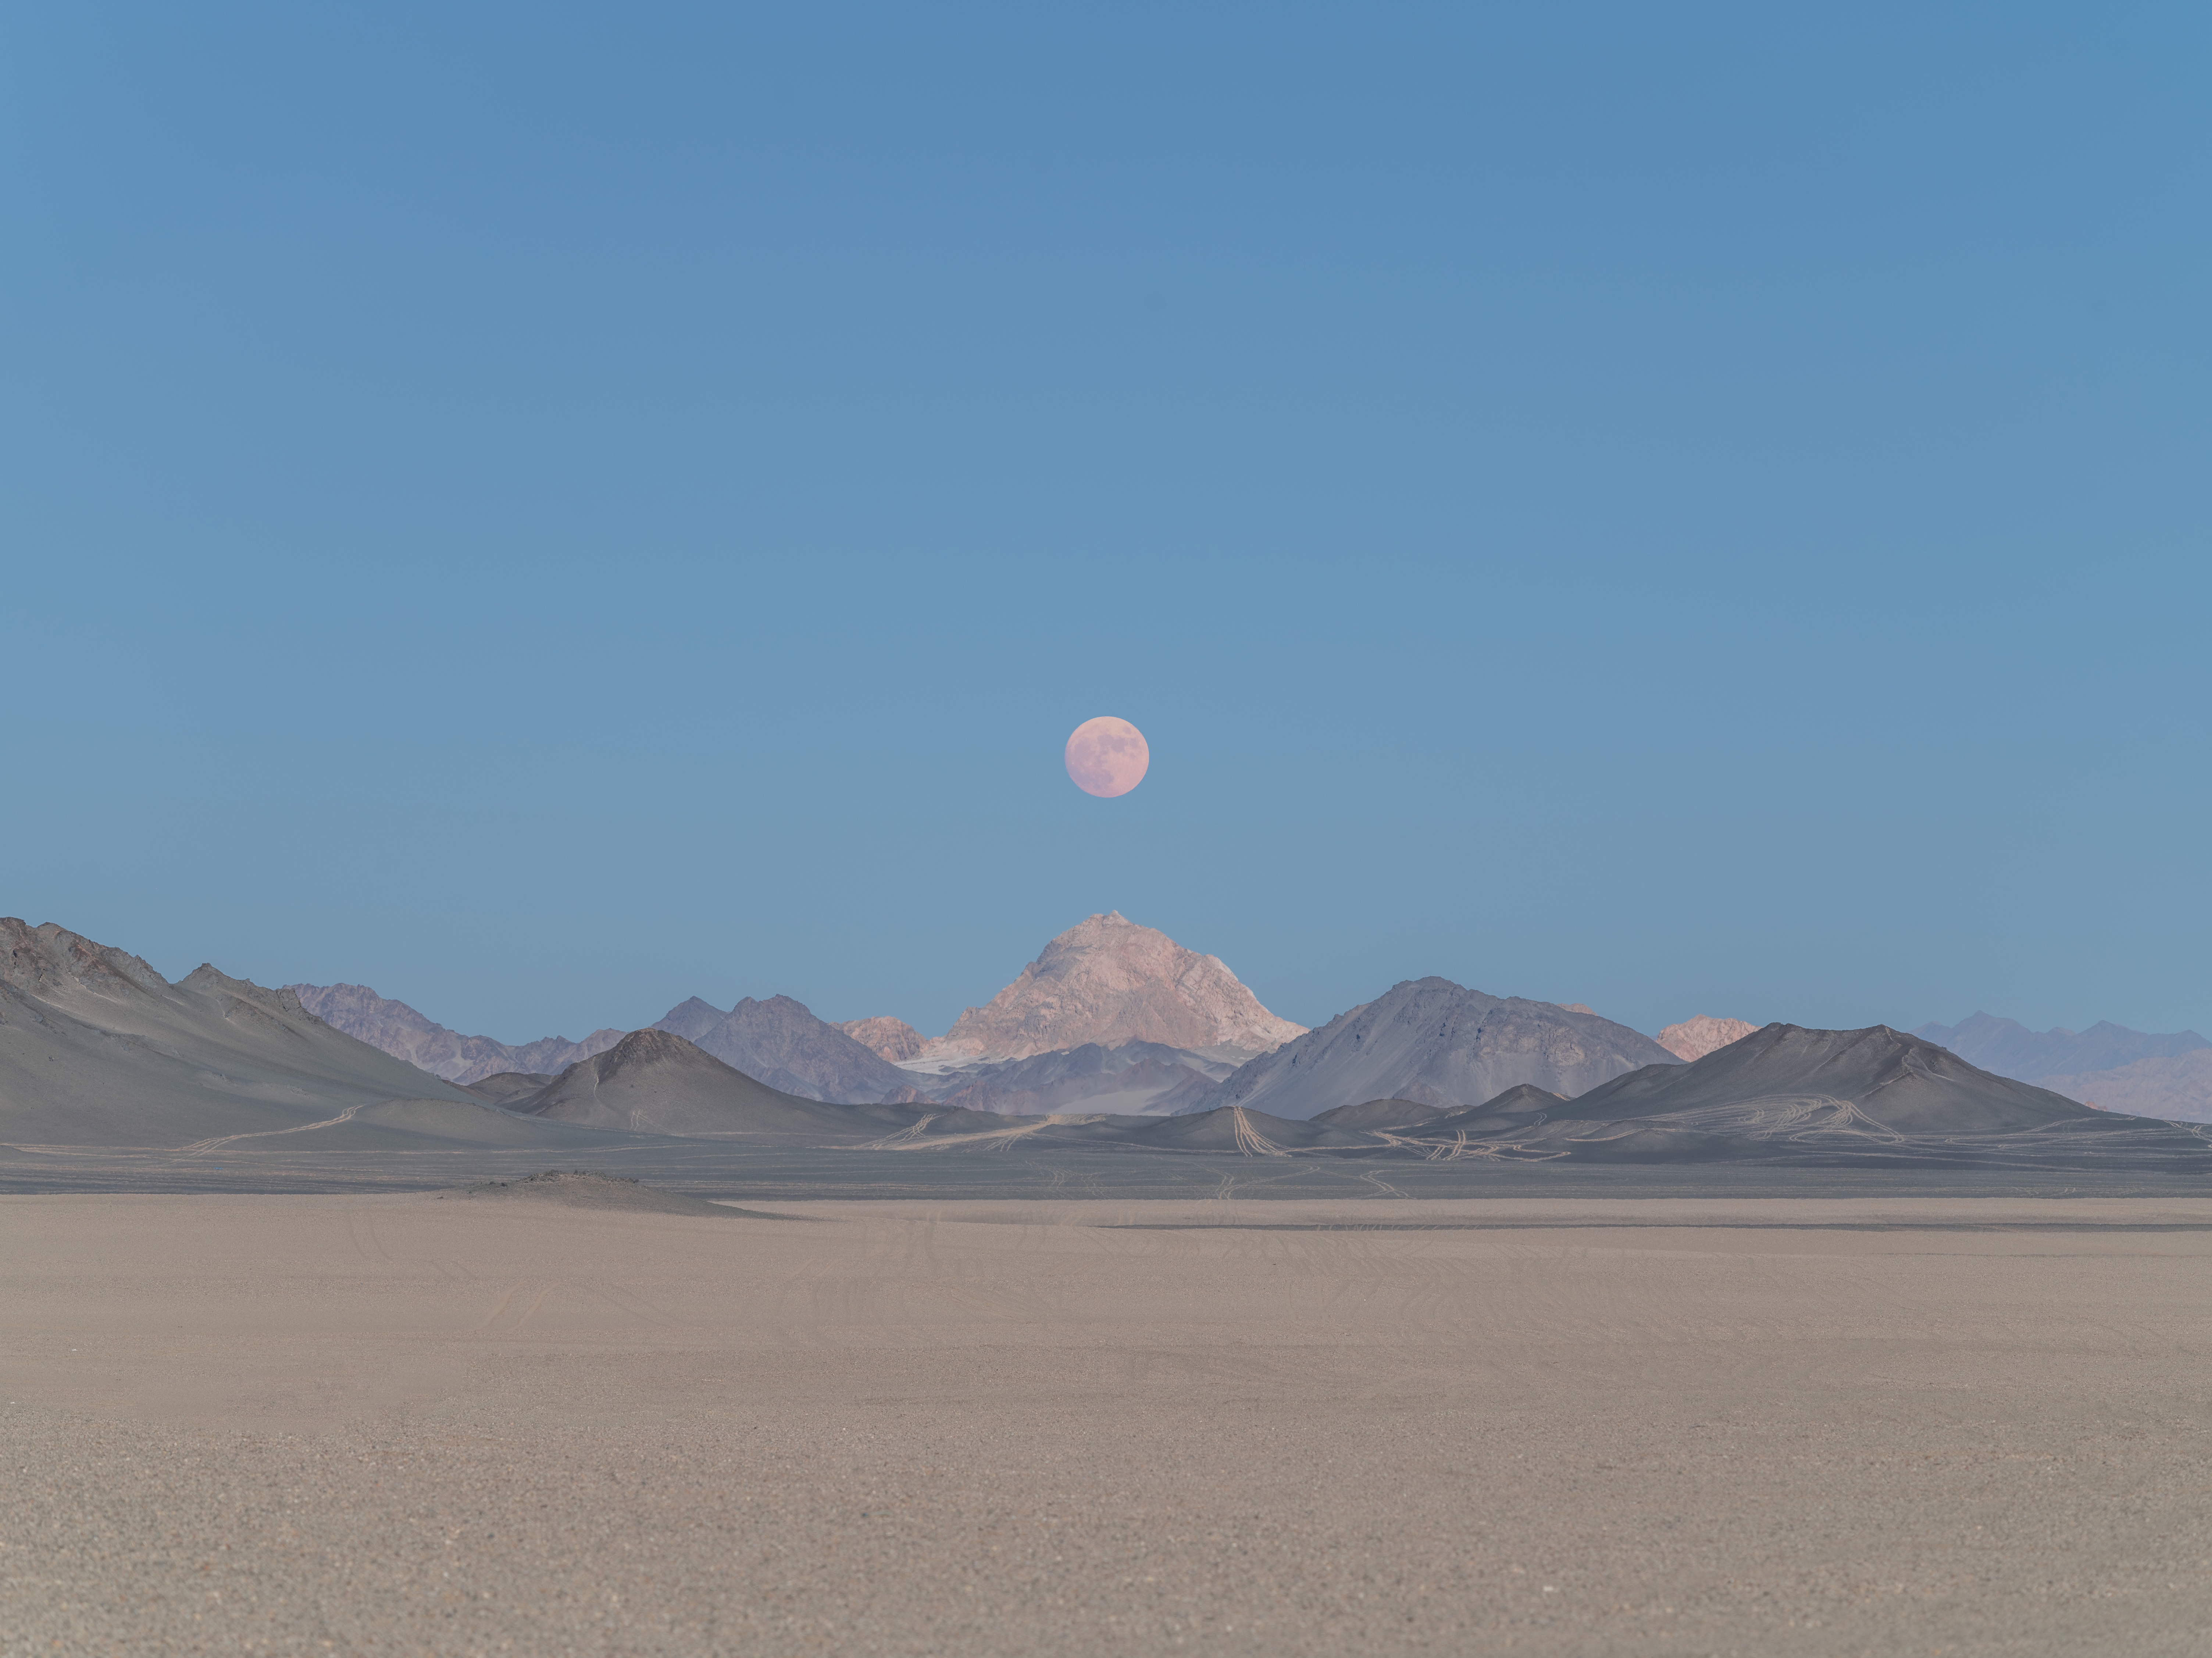 Mountain View Tibet Full Moon Moon Landscape Nature Clear Sky 6016x4510